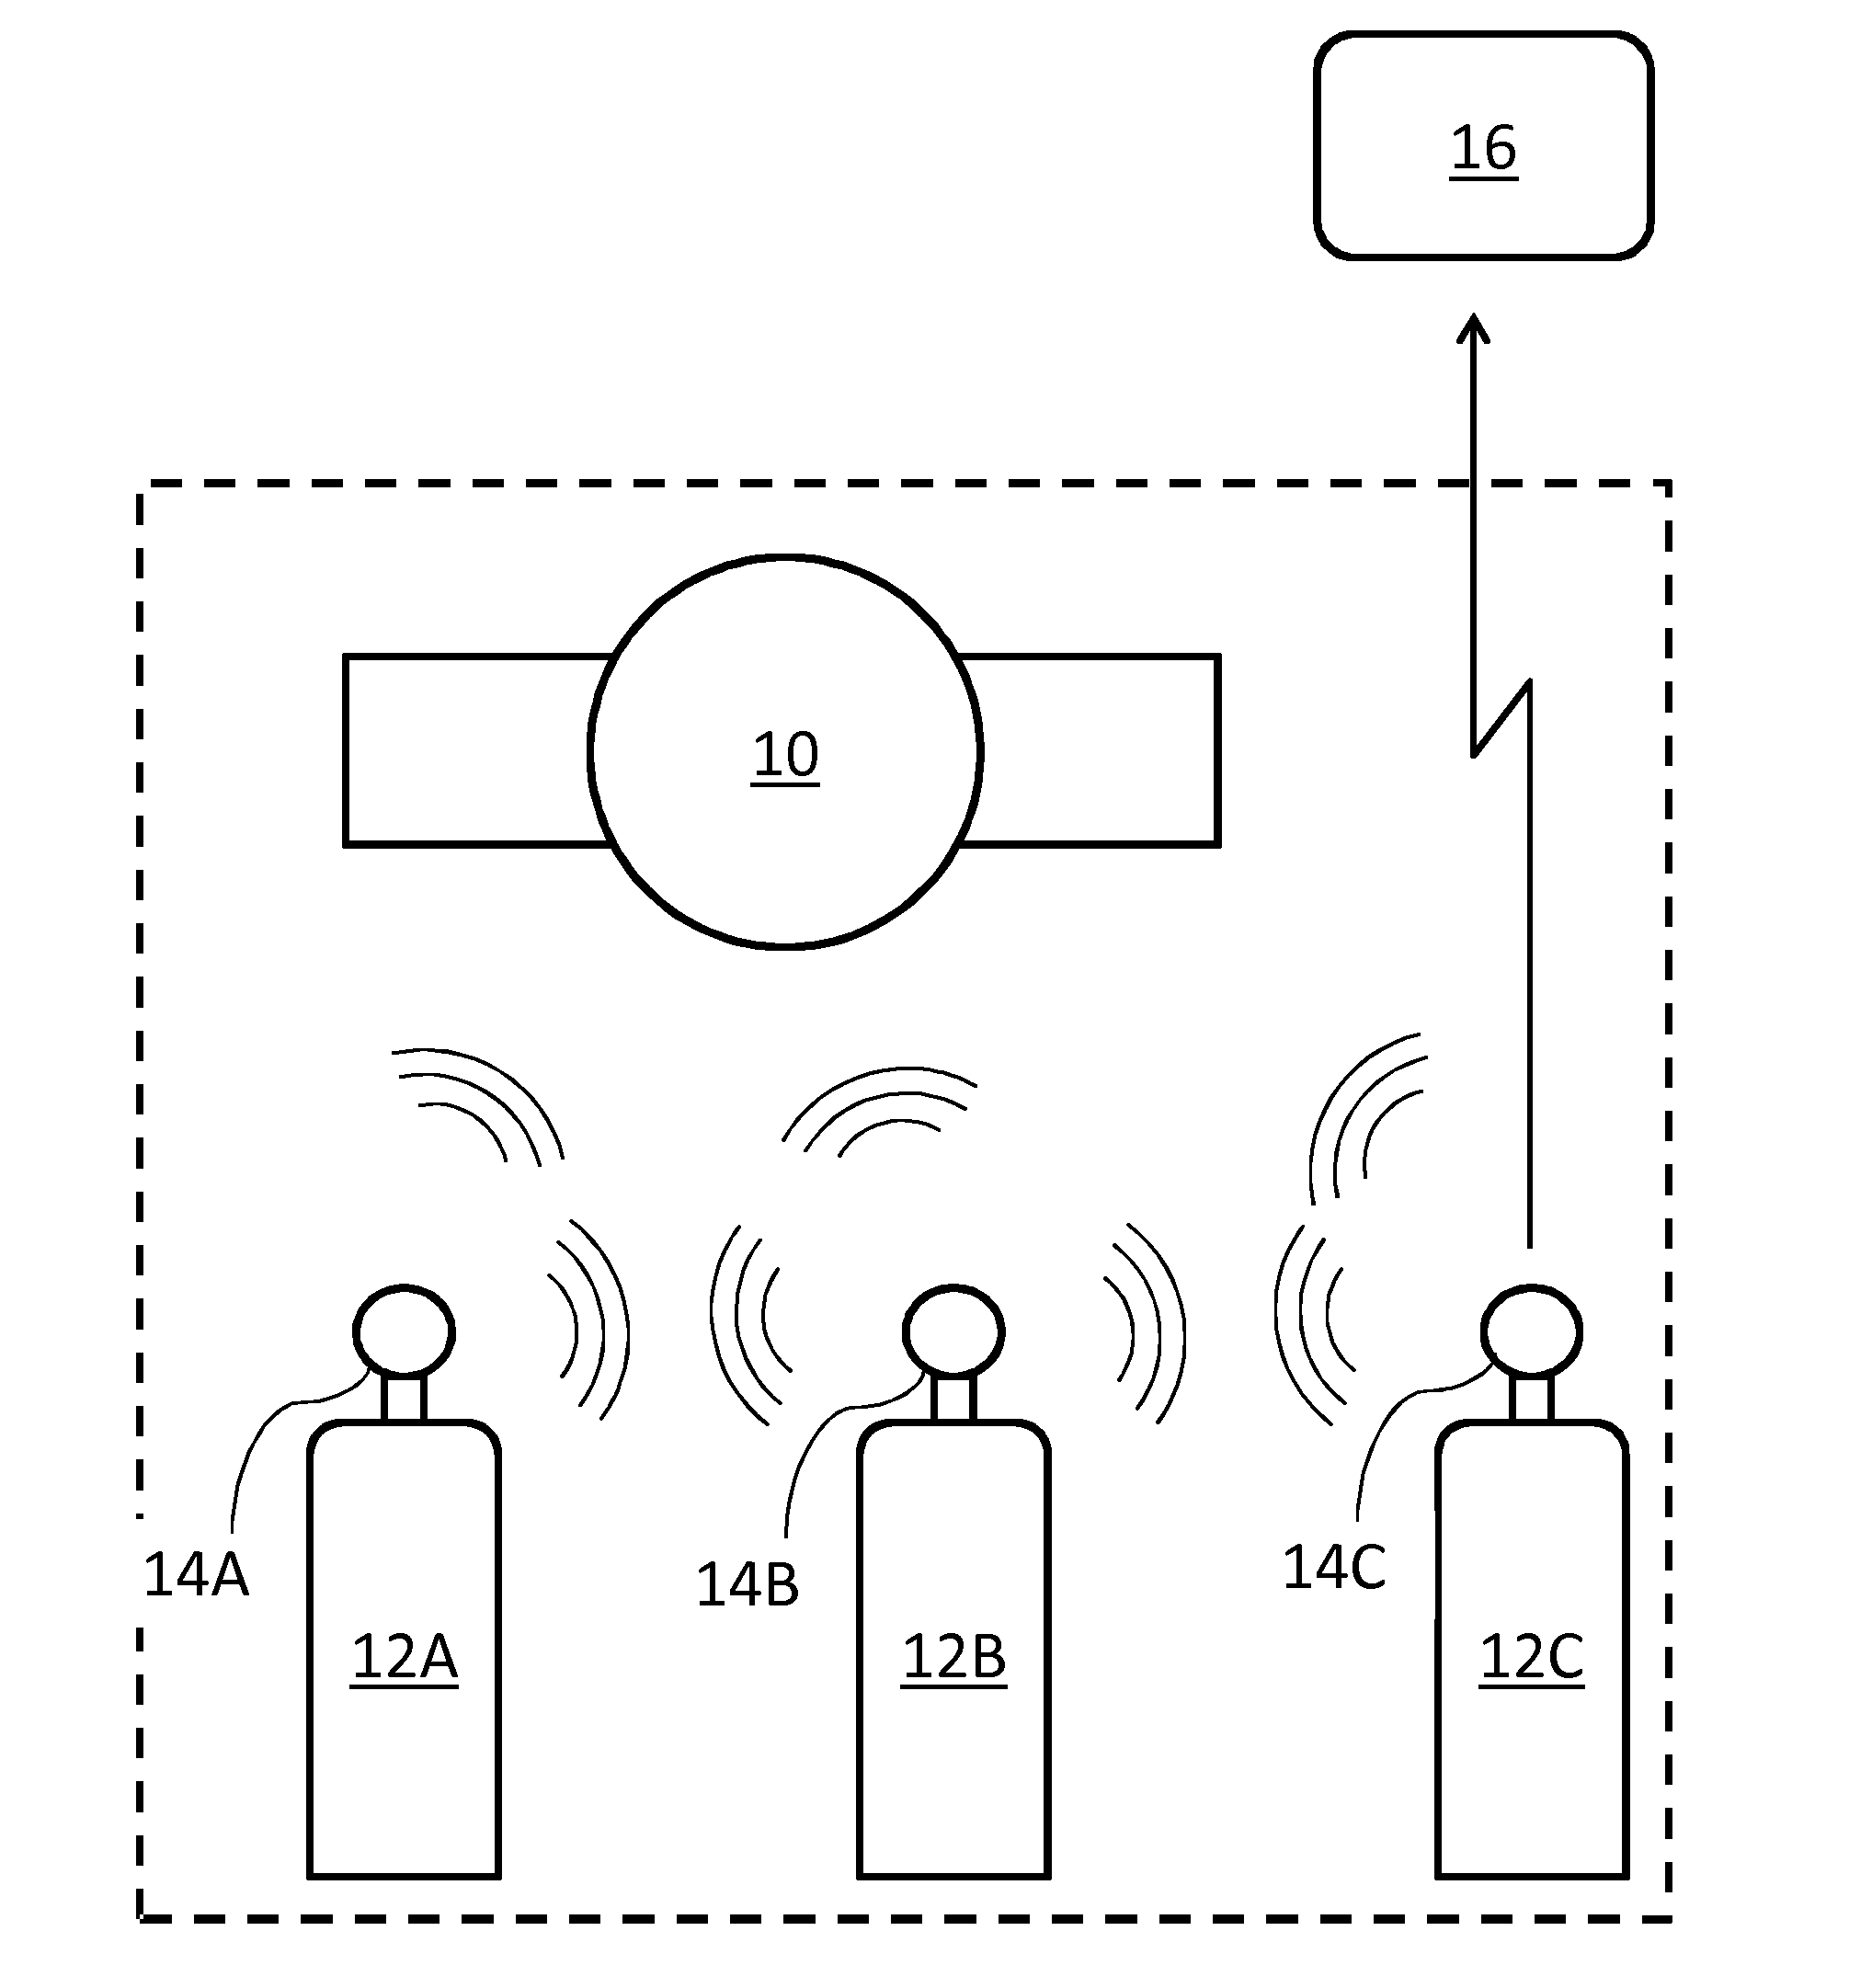 Underwater communication system and related communicating method and devices